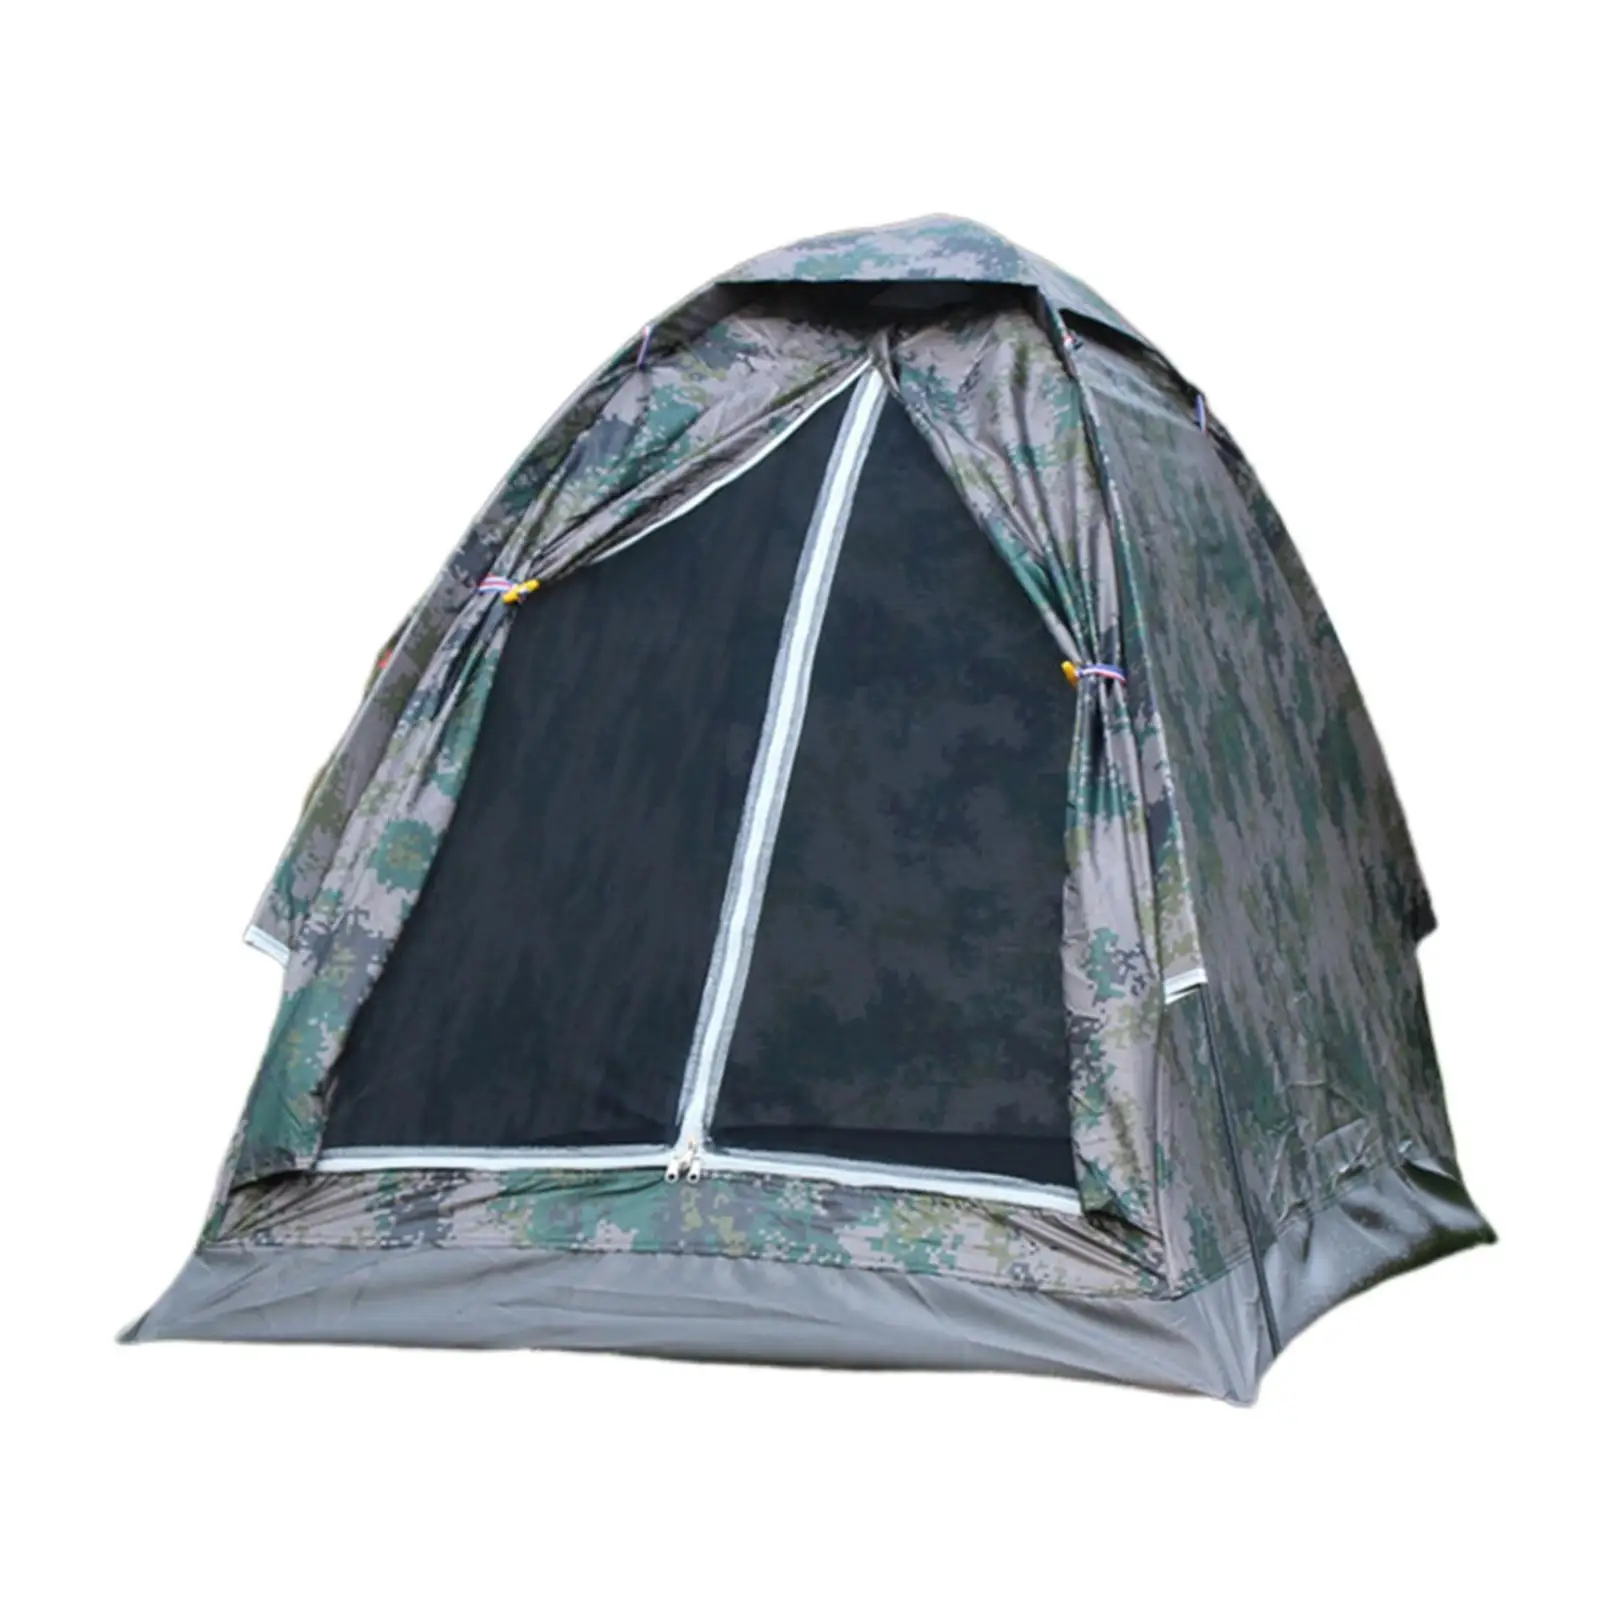 One to Two Person Camping Tent Beach Tent Single Layer Tent Portable Camouflage Outdoor Tent for Hiking Traveling